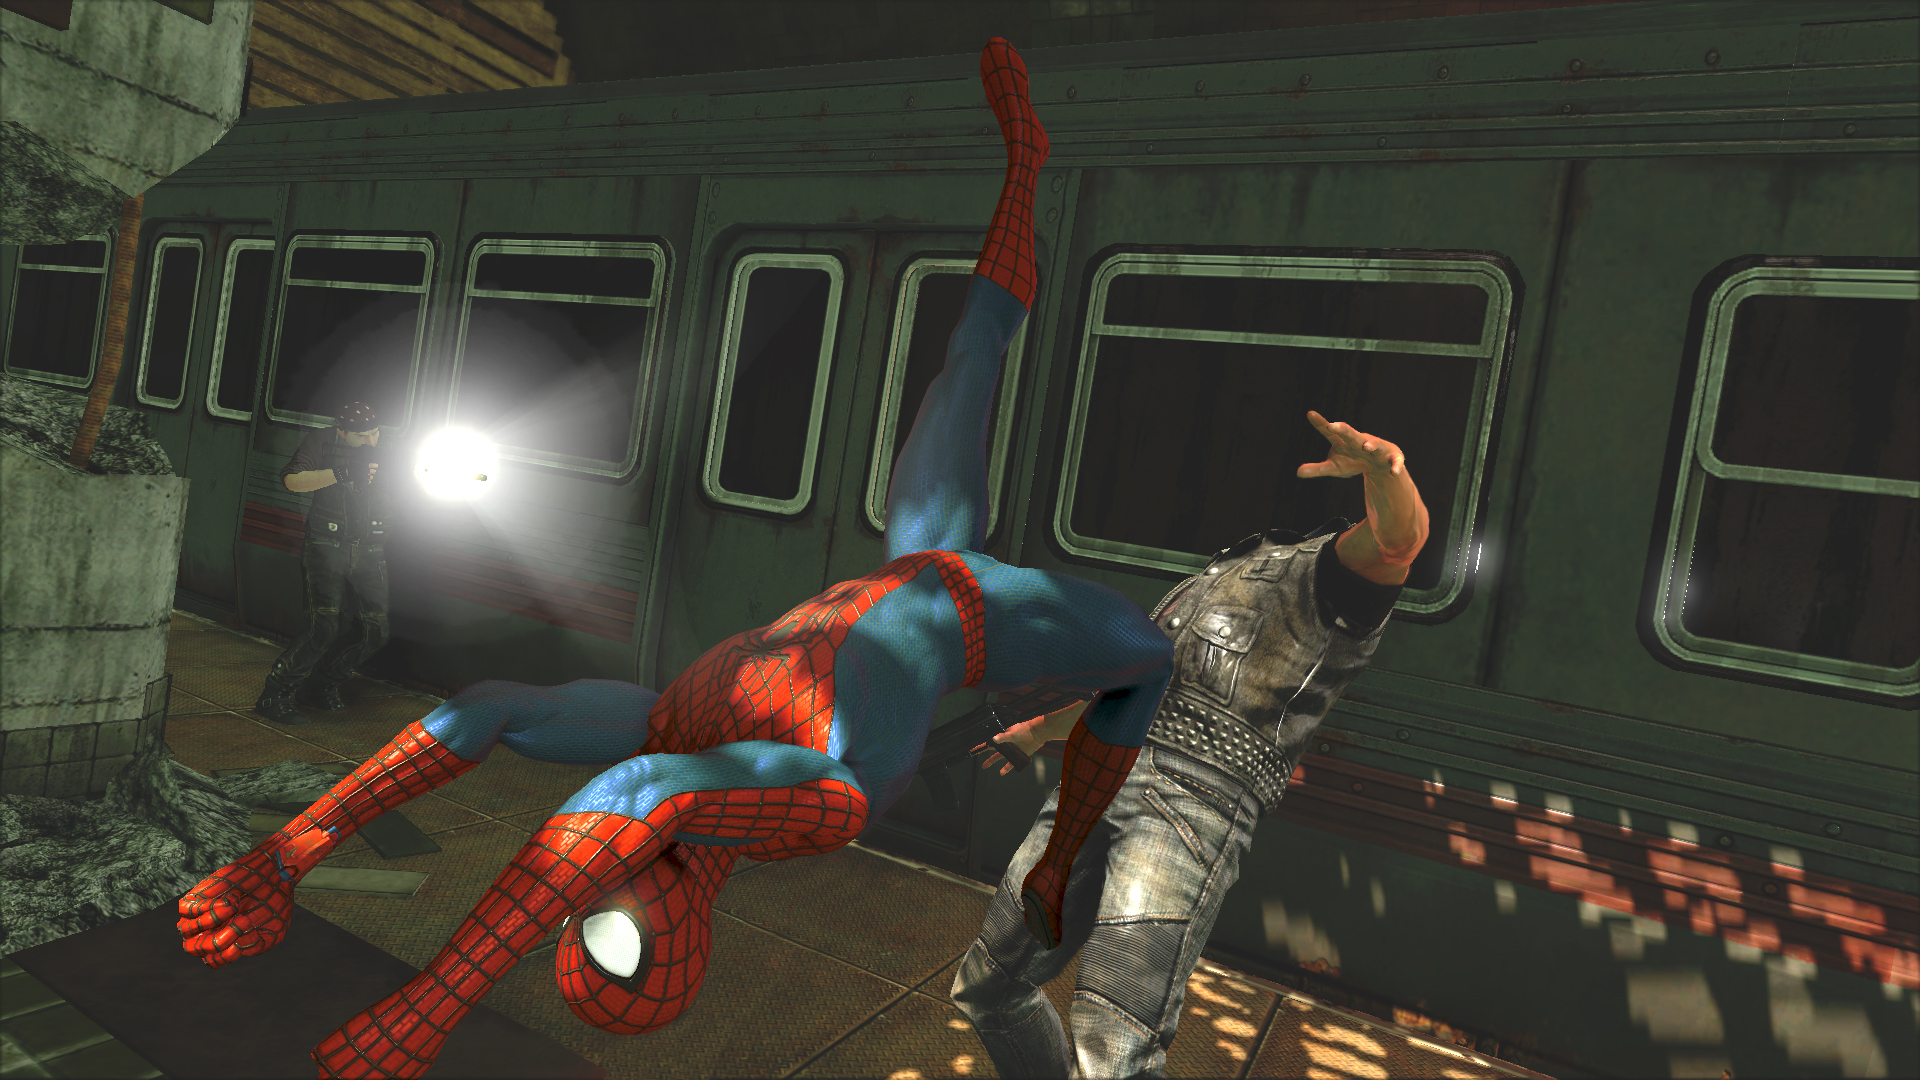 The Amazing Spiderman 2 (PS3) - image 5 of 10